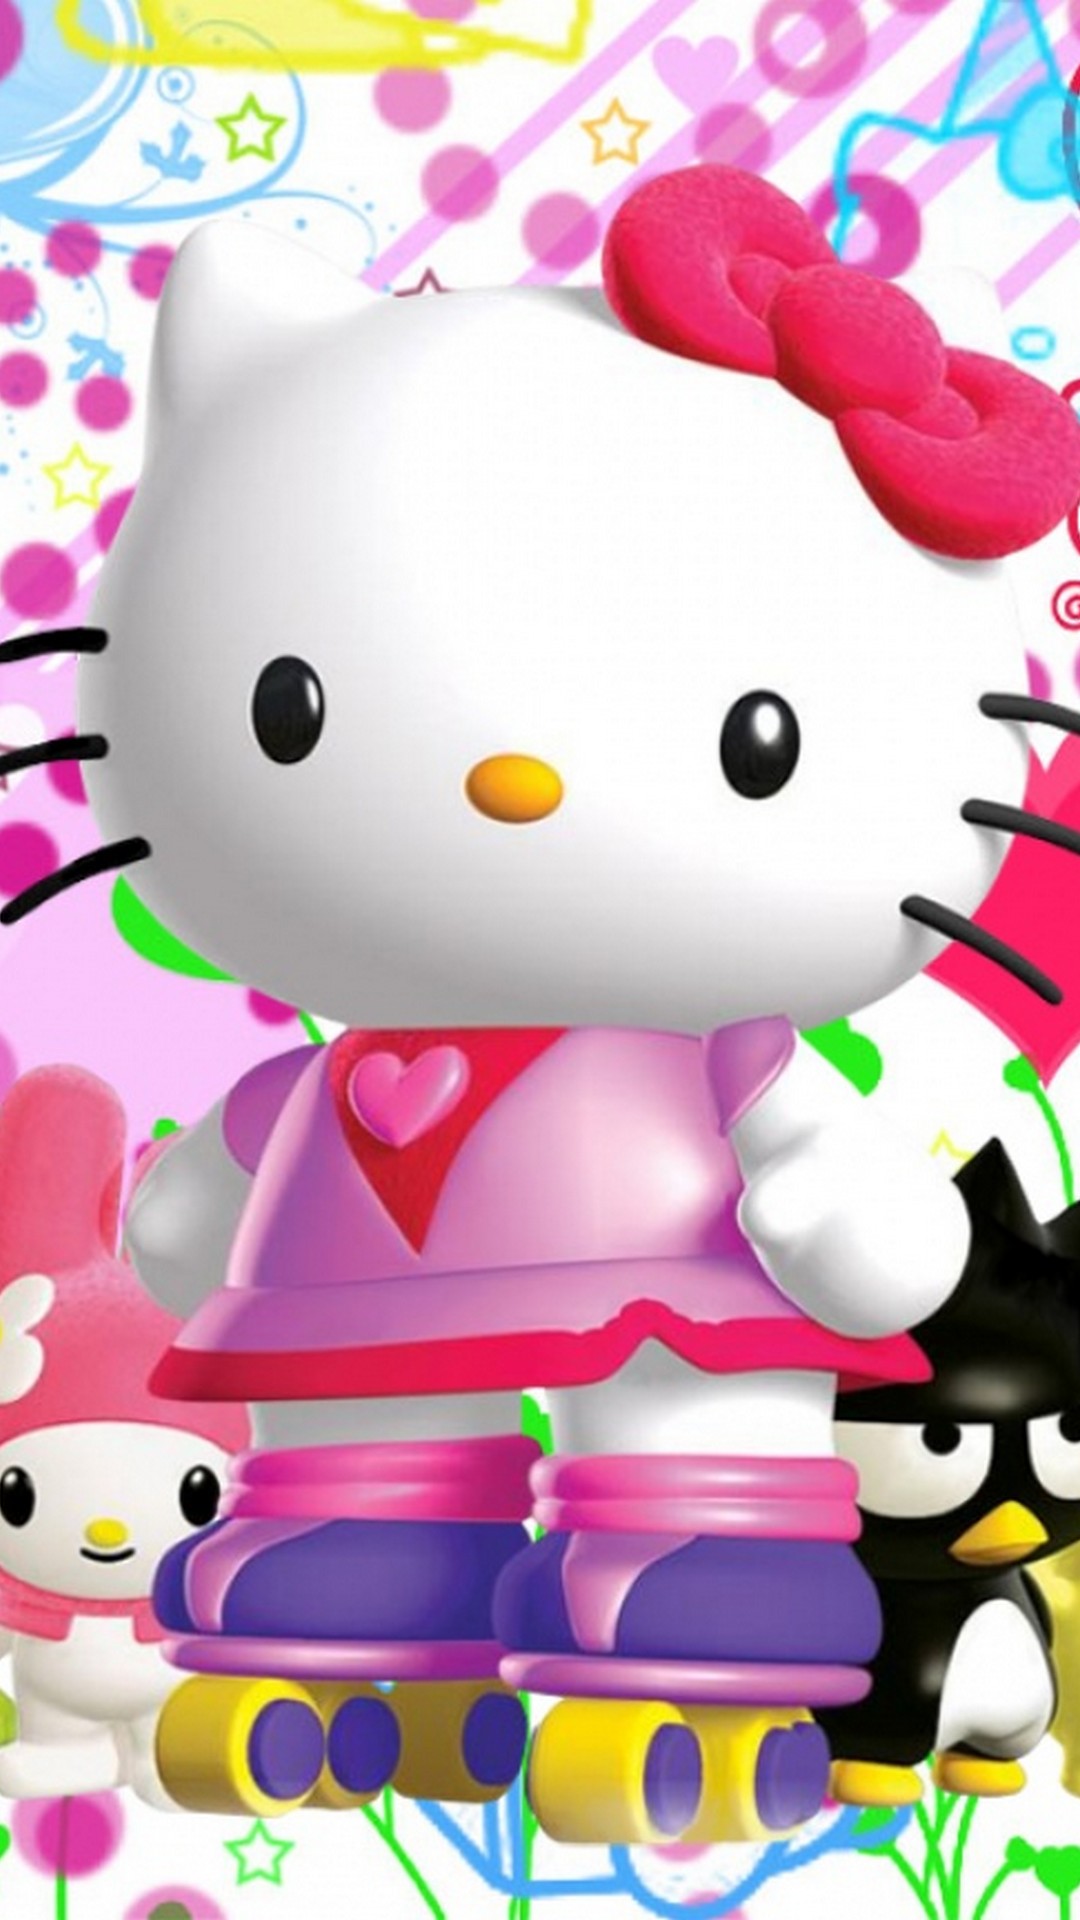 Hello Kitty Pictures Android Wallpaper with resolution 1080X1920 pixel. You can make this wallpaper for your Android backgrounds, Tablet, Smartphones Screensavers and Mobile Phone Lock Screen